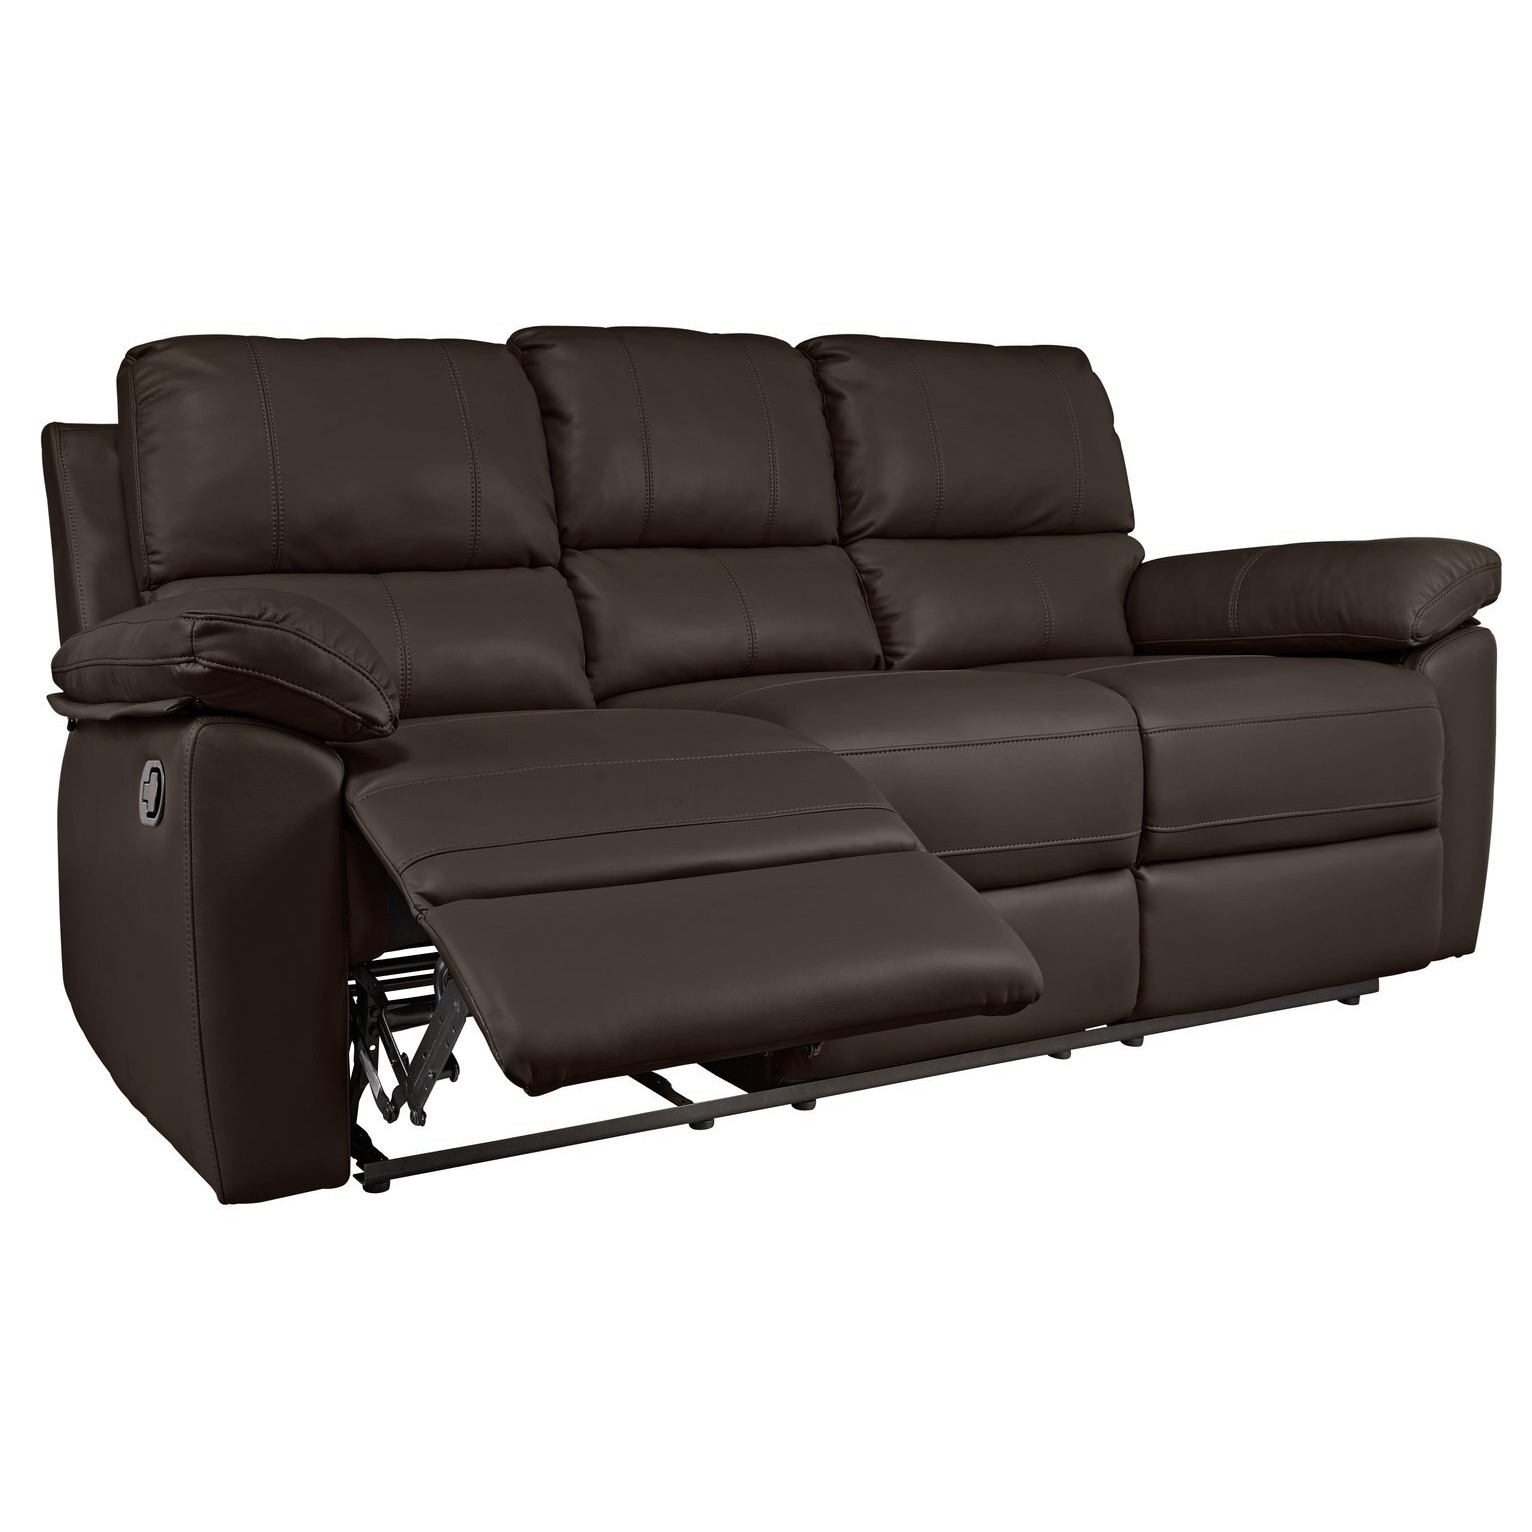 Argos Home Toby Faux Leather 3 Seater